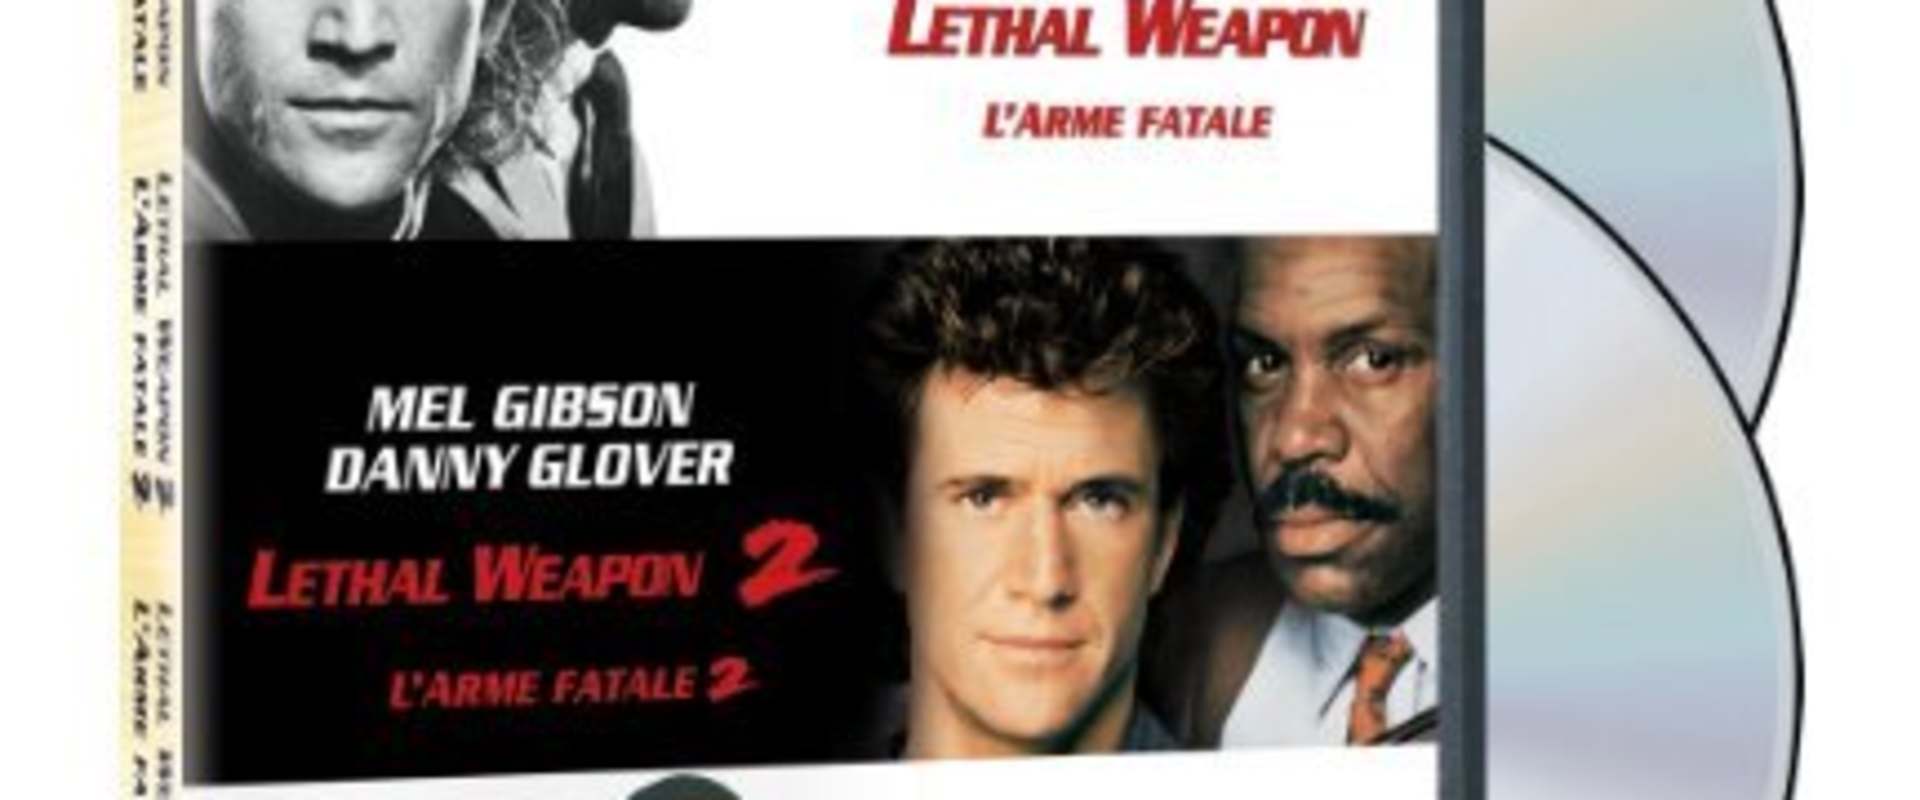 Lethal Weapon 3 background 2